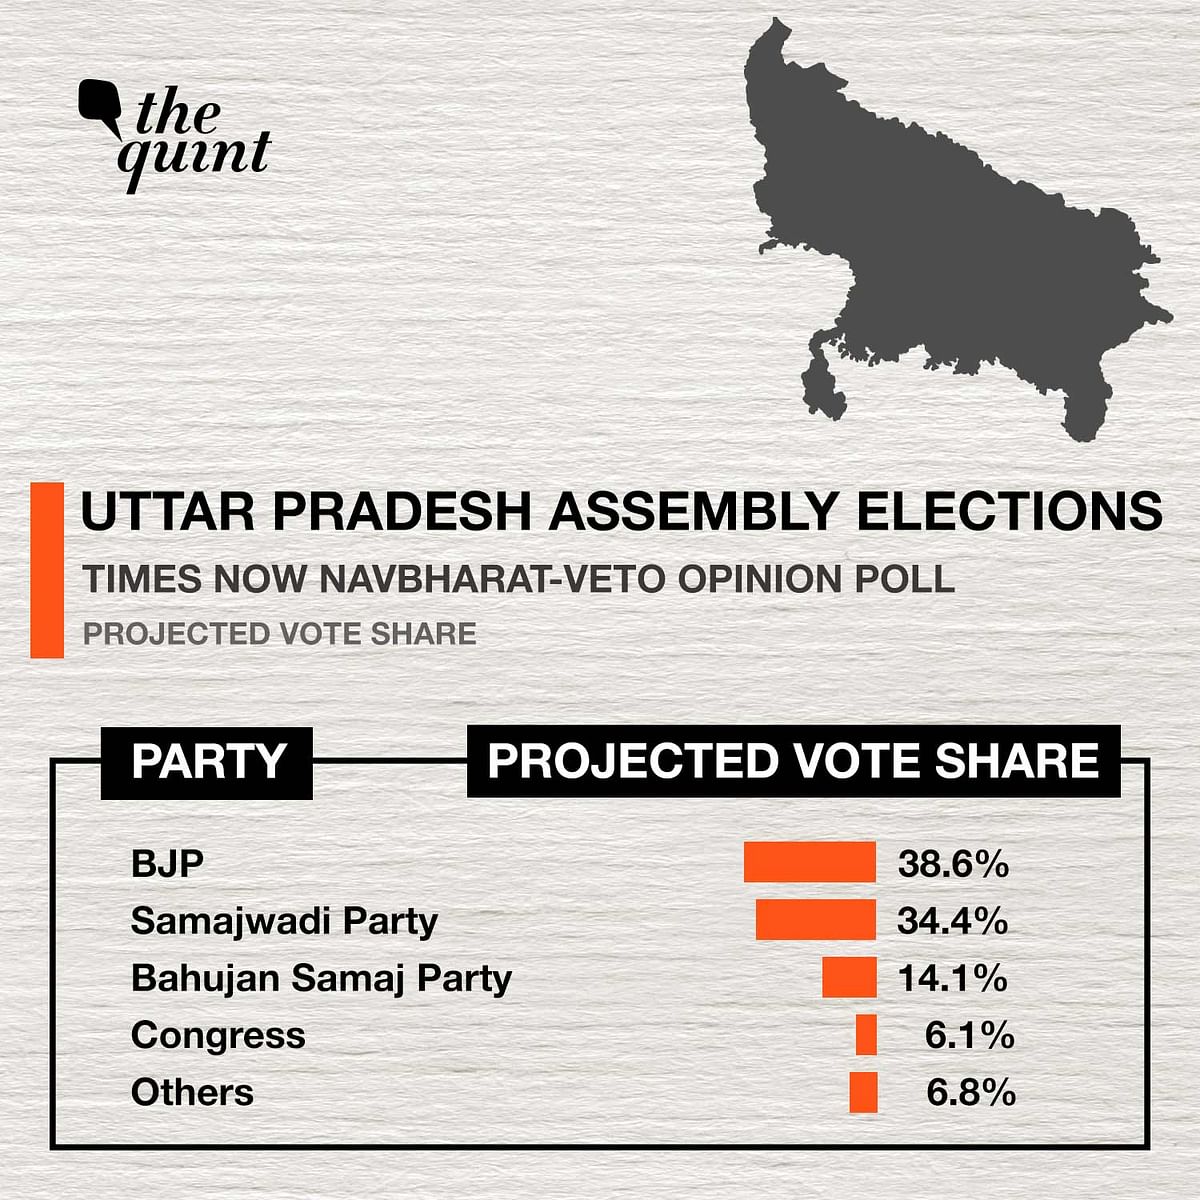 A majority of the respondents felt that the BJP's image had declined after the COVID pandemic and Lakhimpur deaths.